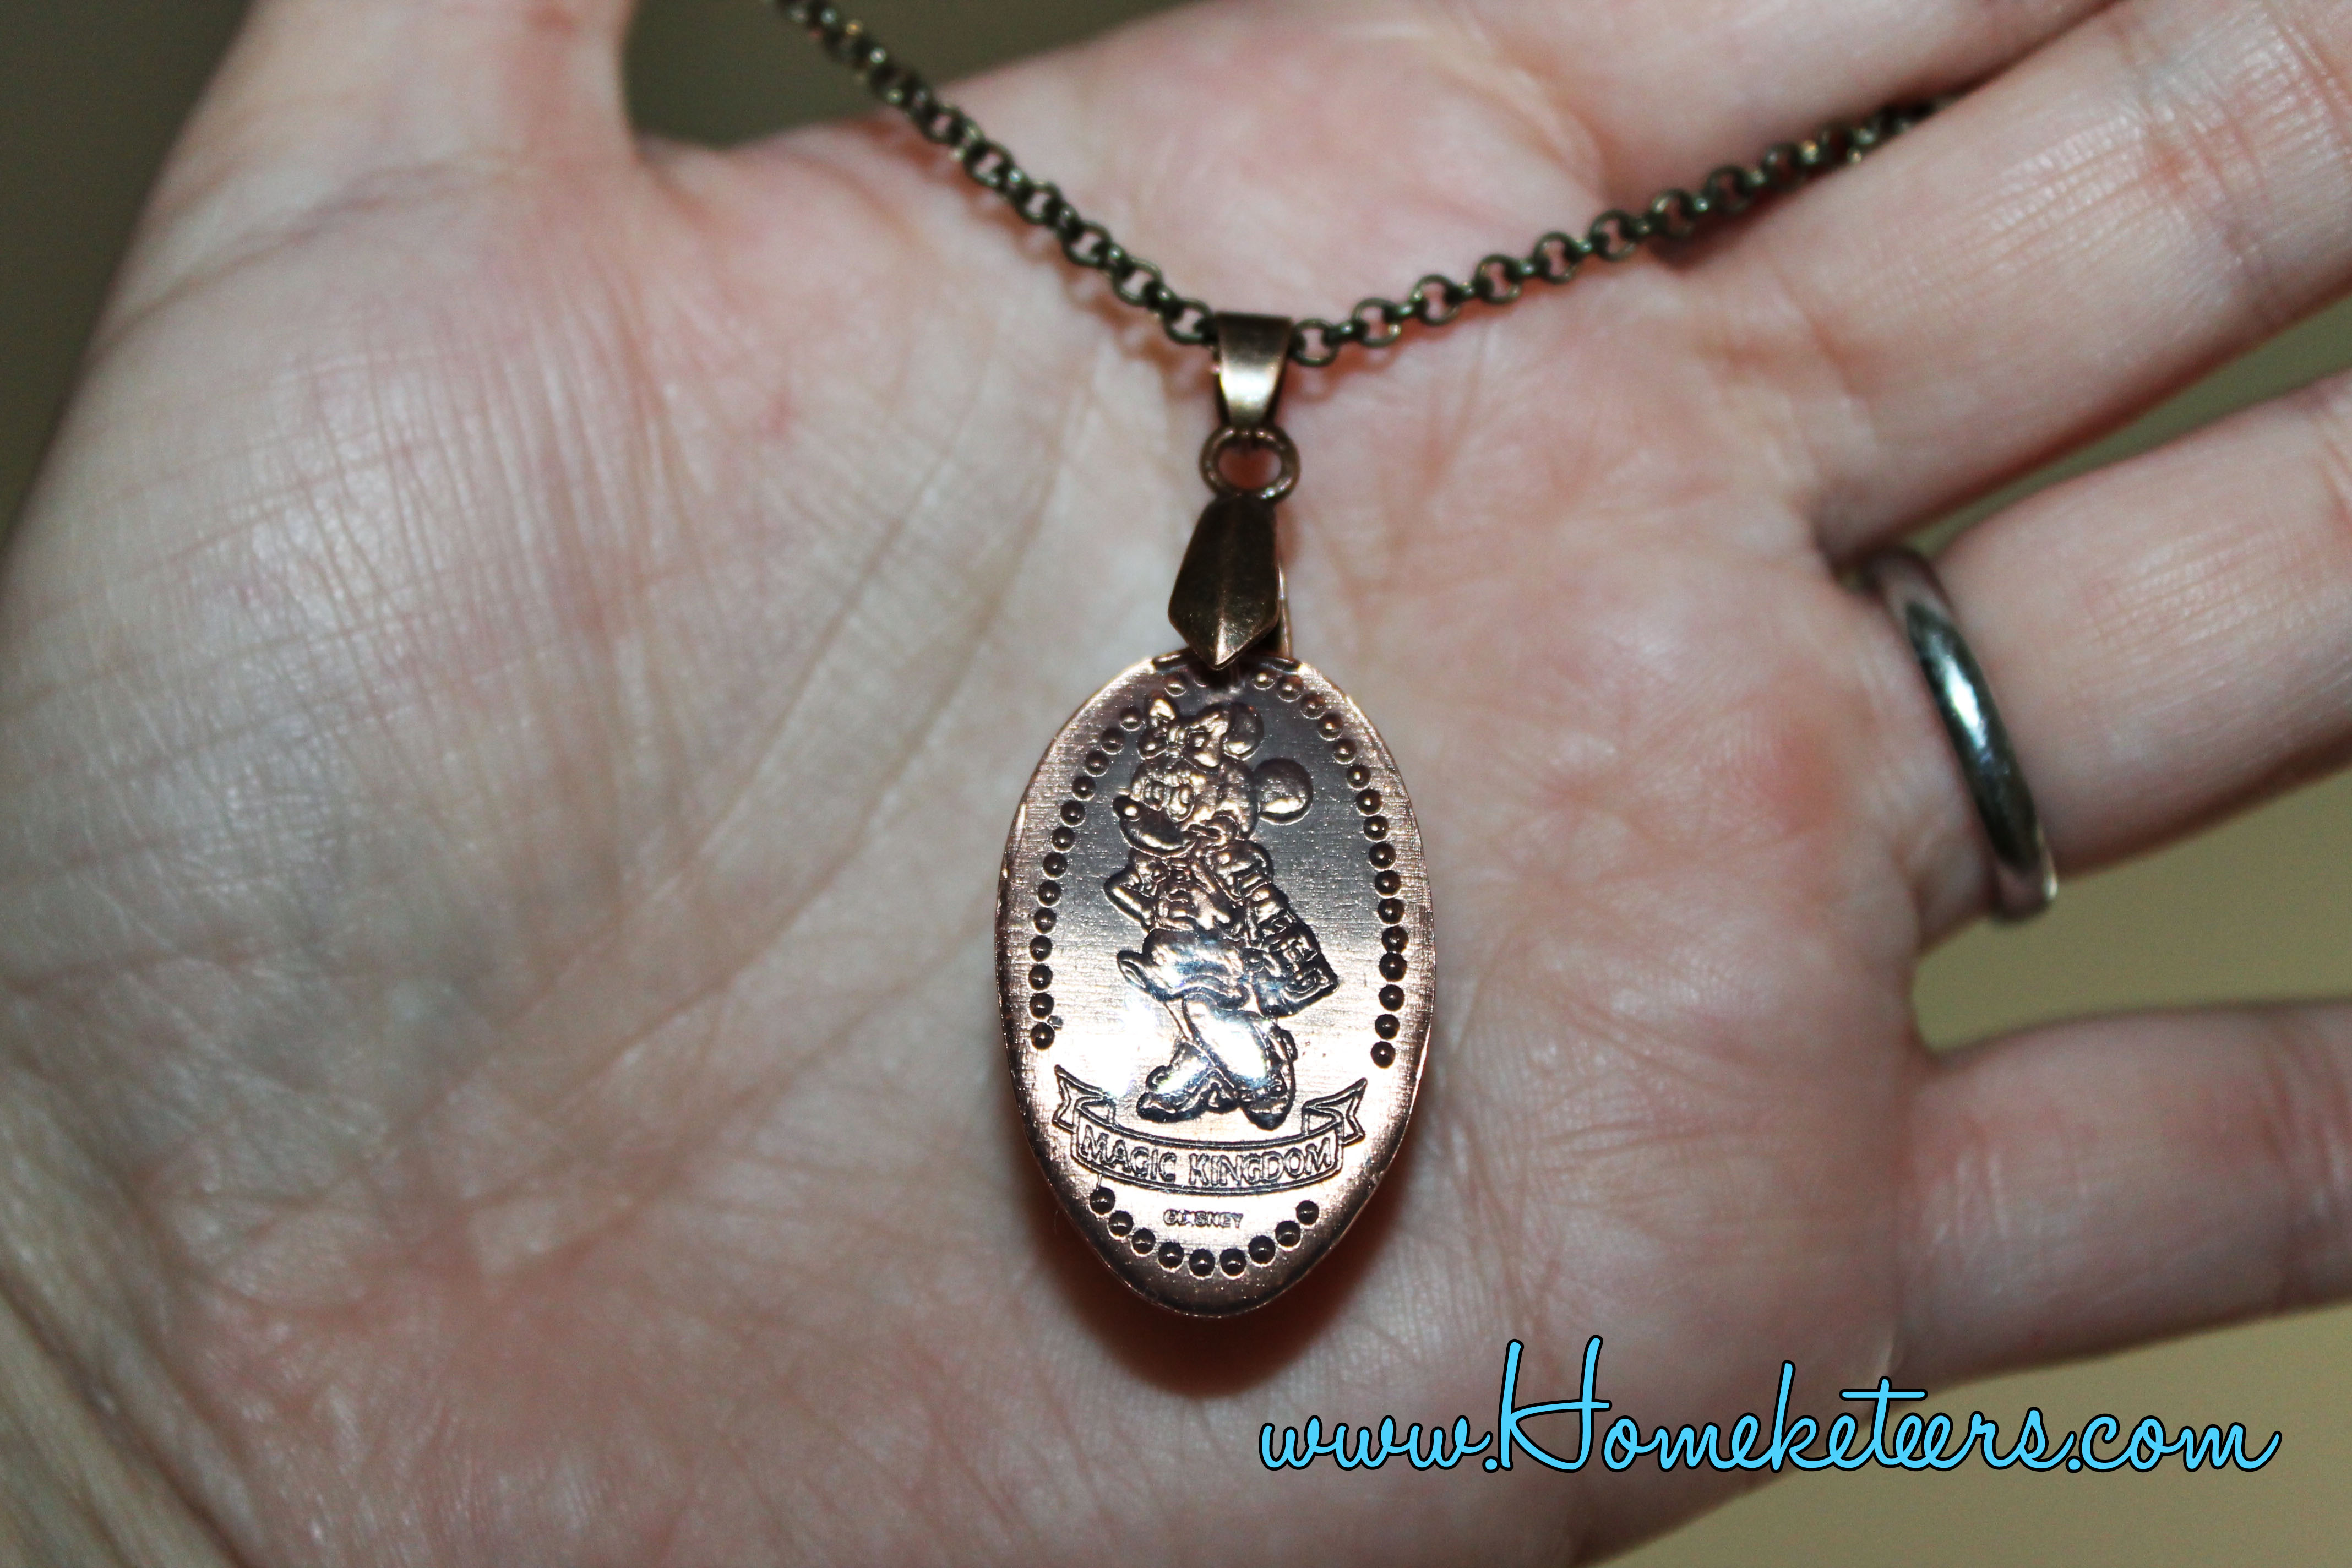 Making a Necklace out of Disney Pressed Pennies